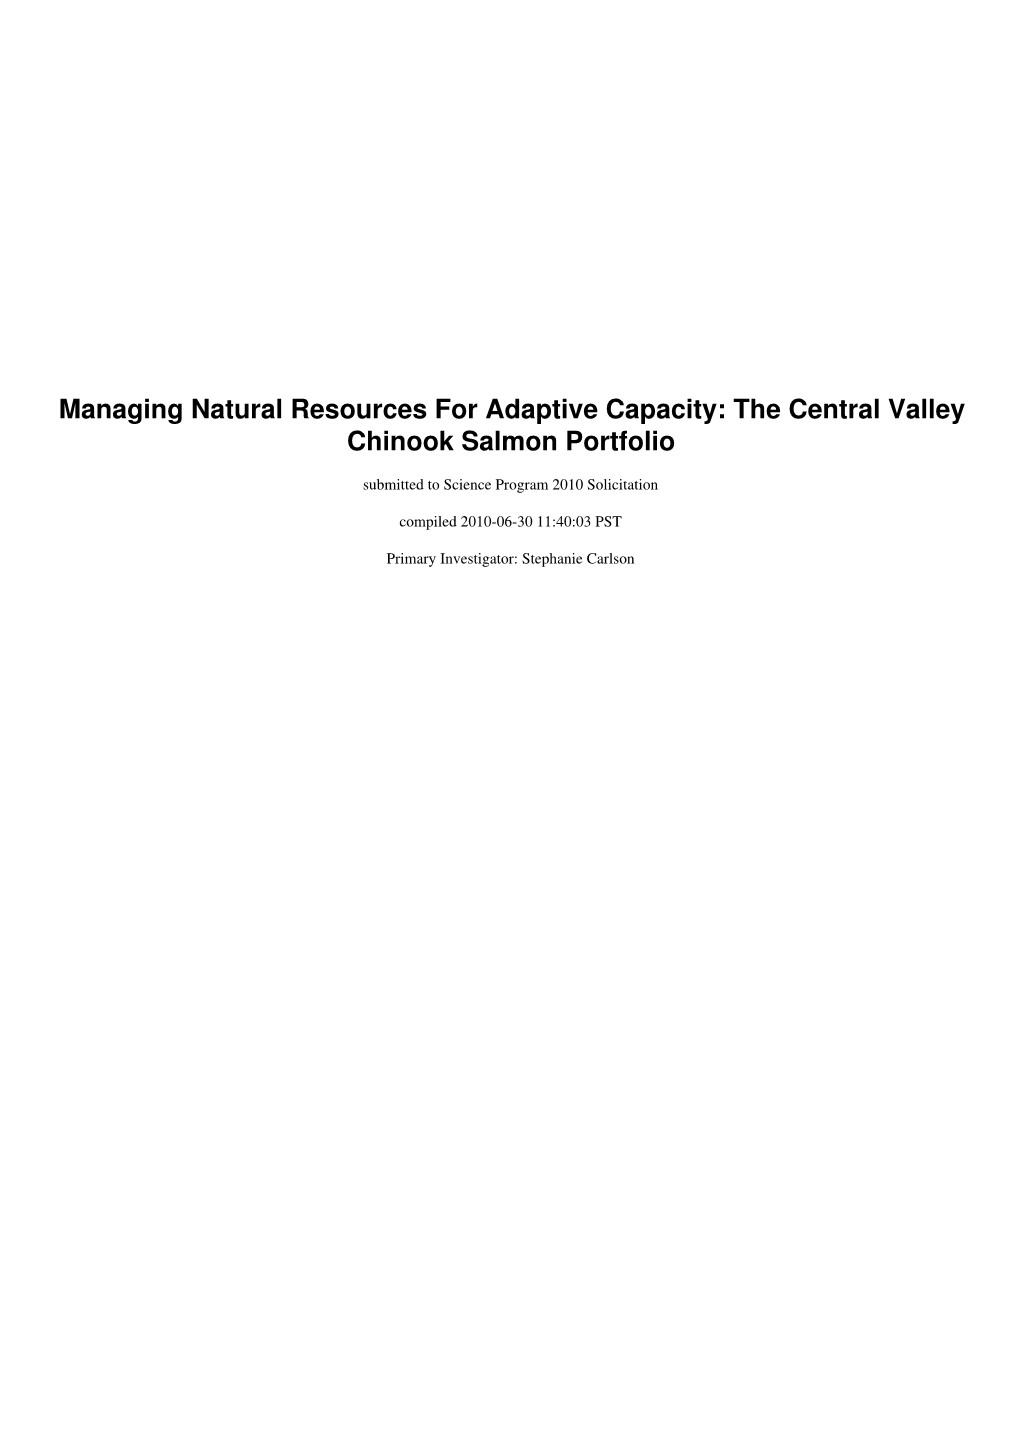 Managing Natural Resources for Adaptive Capacity: the Central Valley Chinook Salmon Portfolio